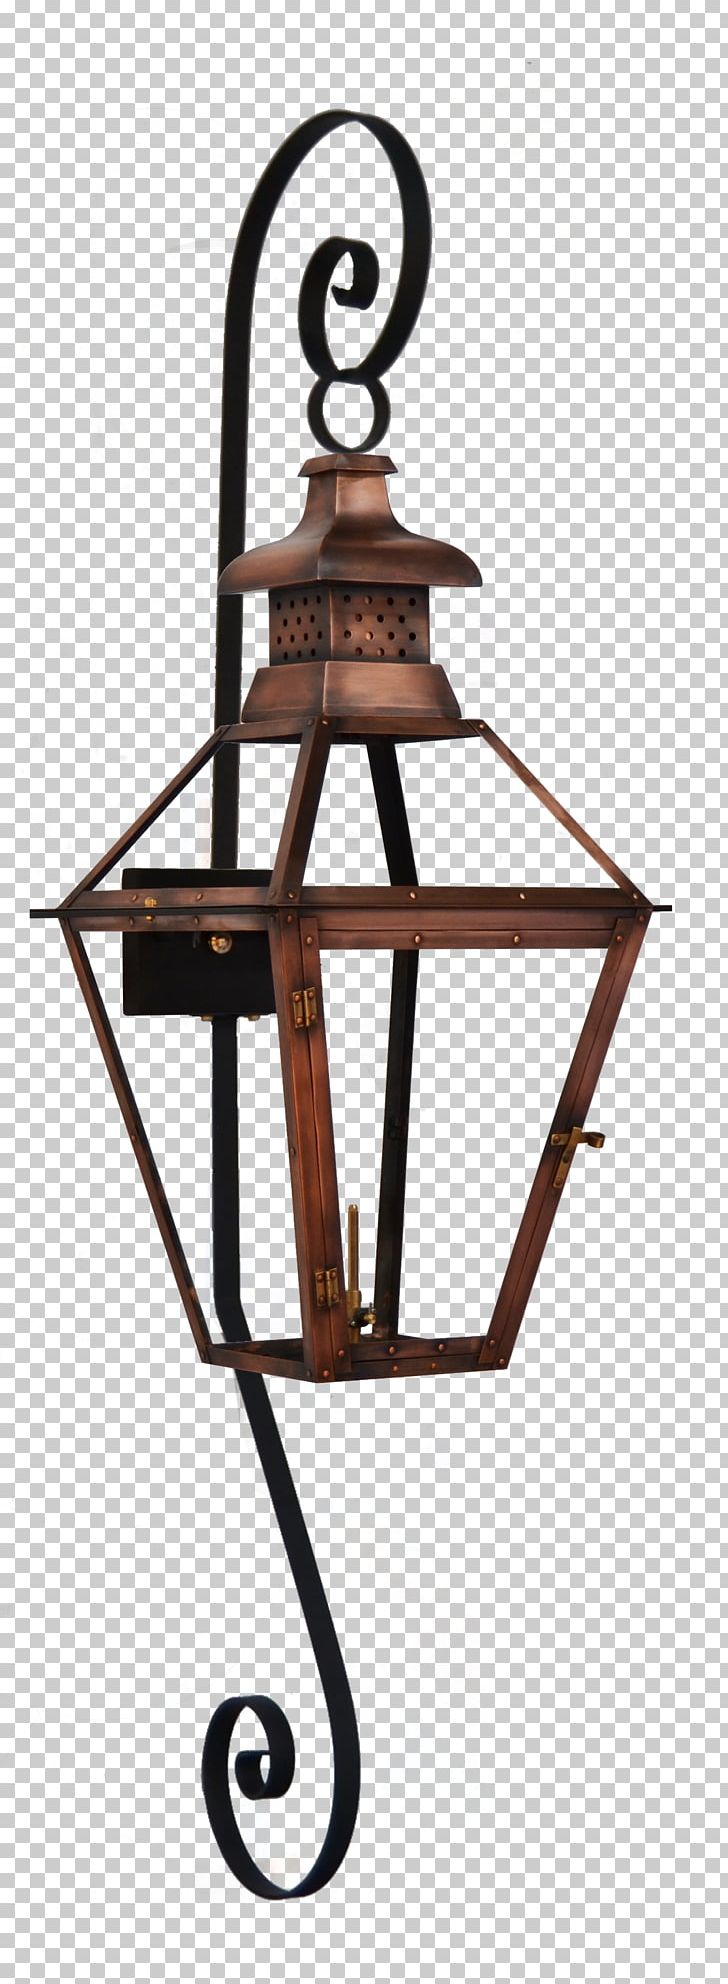 Gas Lighting Paper Lantern Coppersmith PNG, Clipart, Ceiling Fixture, Copper, Coppersmith, Electricity, Flame Free PNG Download